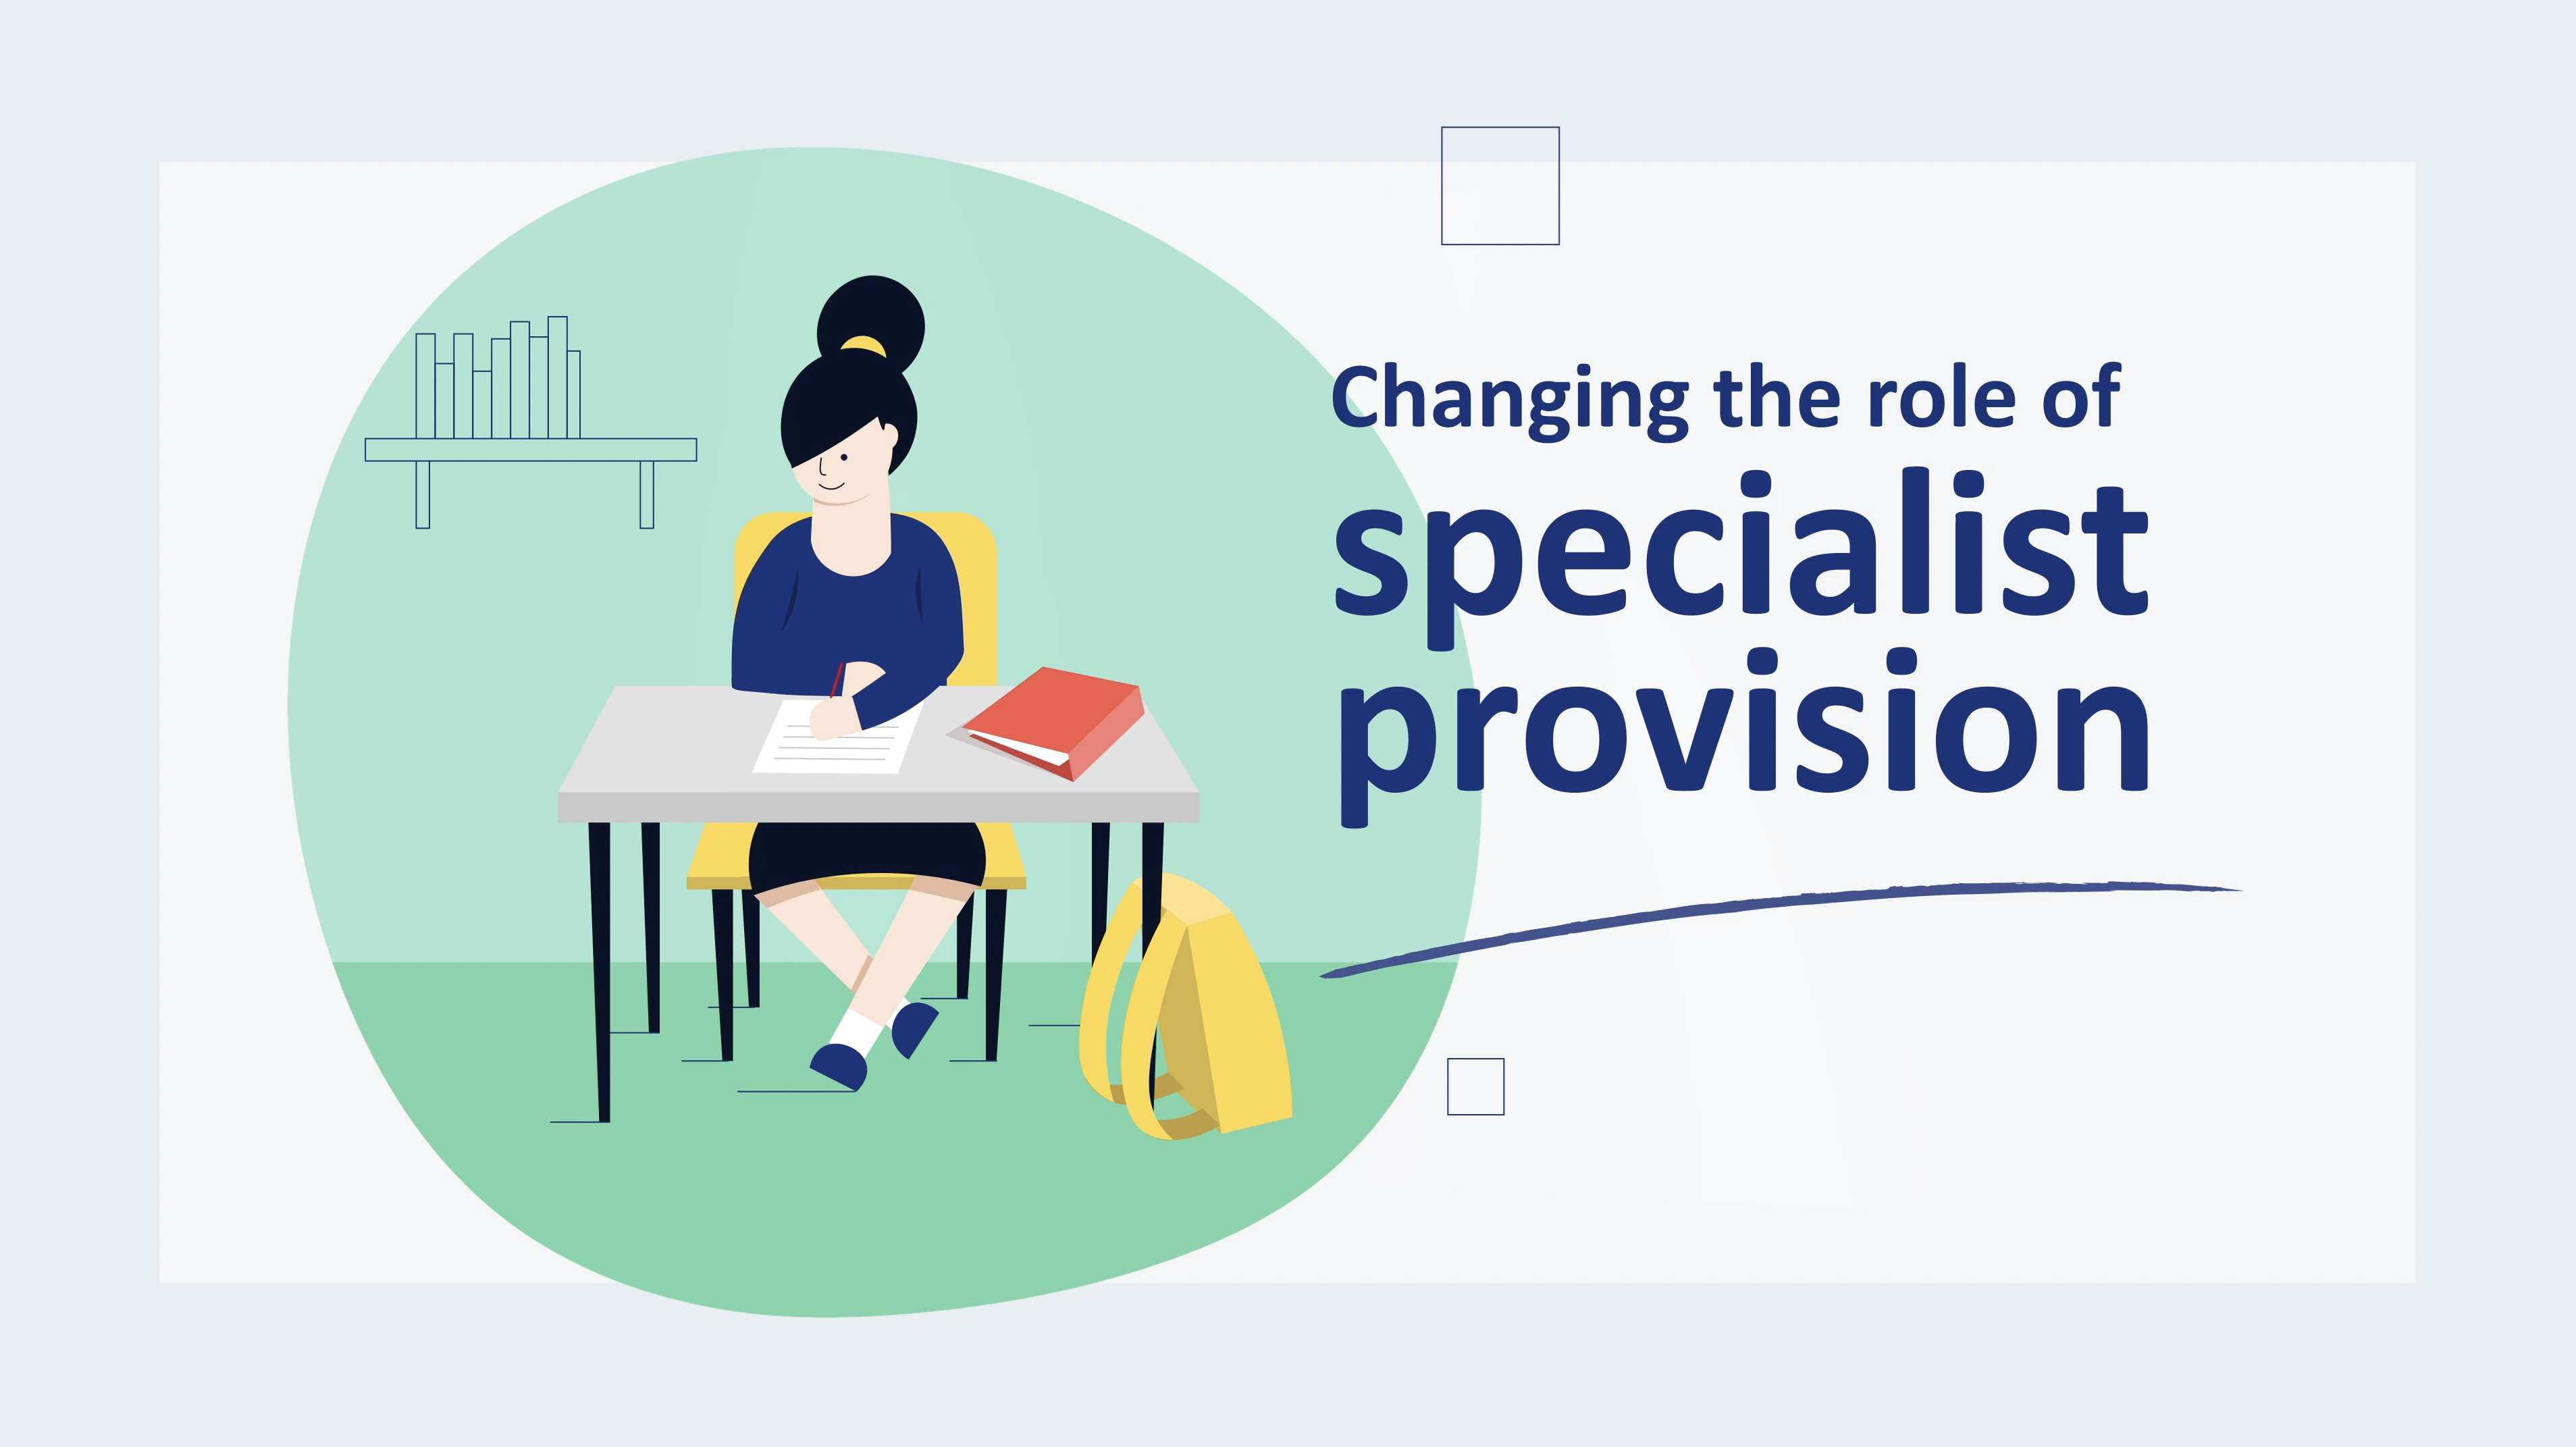 Why we should change the role of specialist provision to support inclusive education